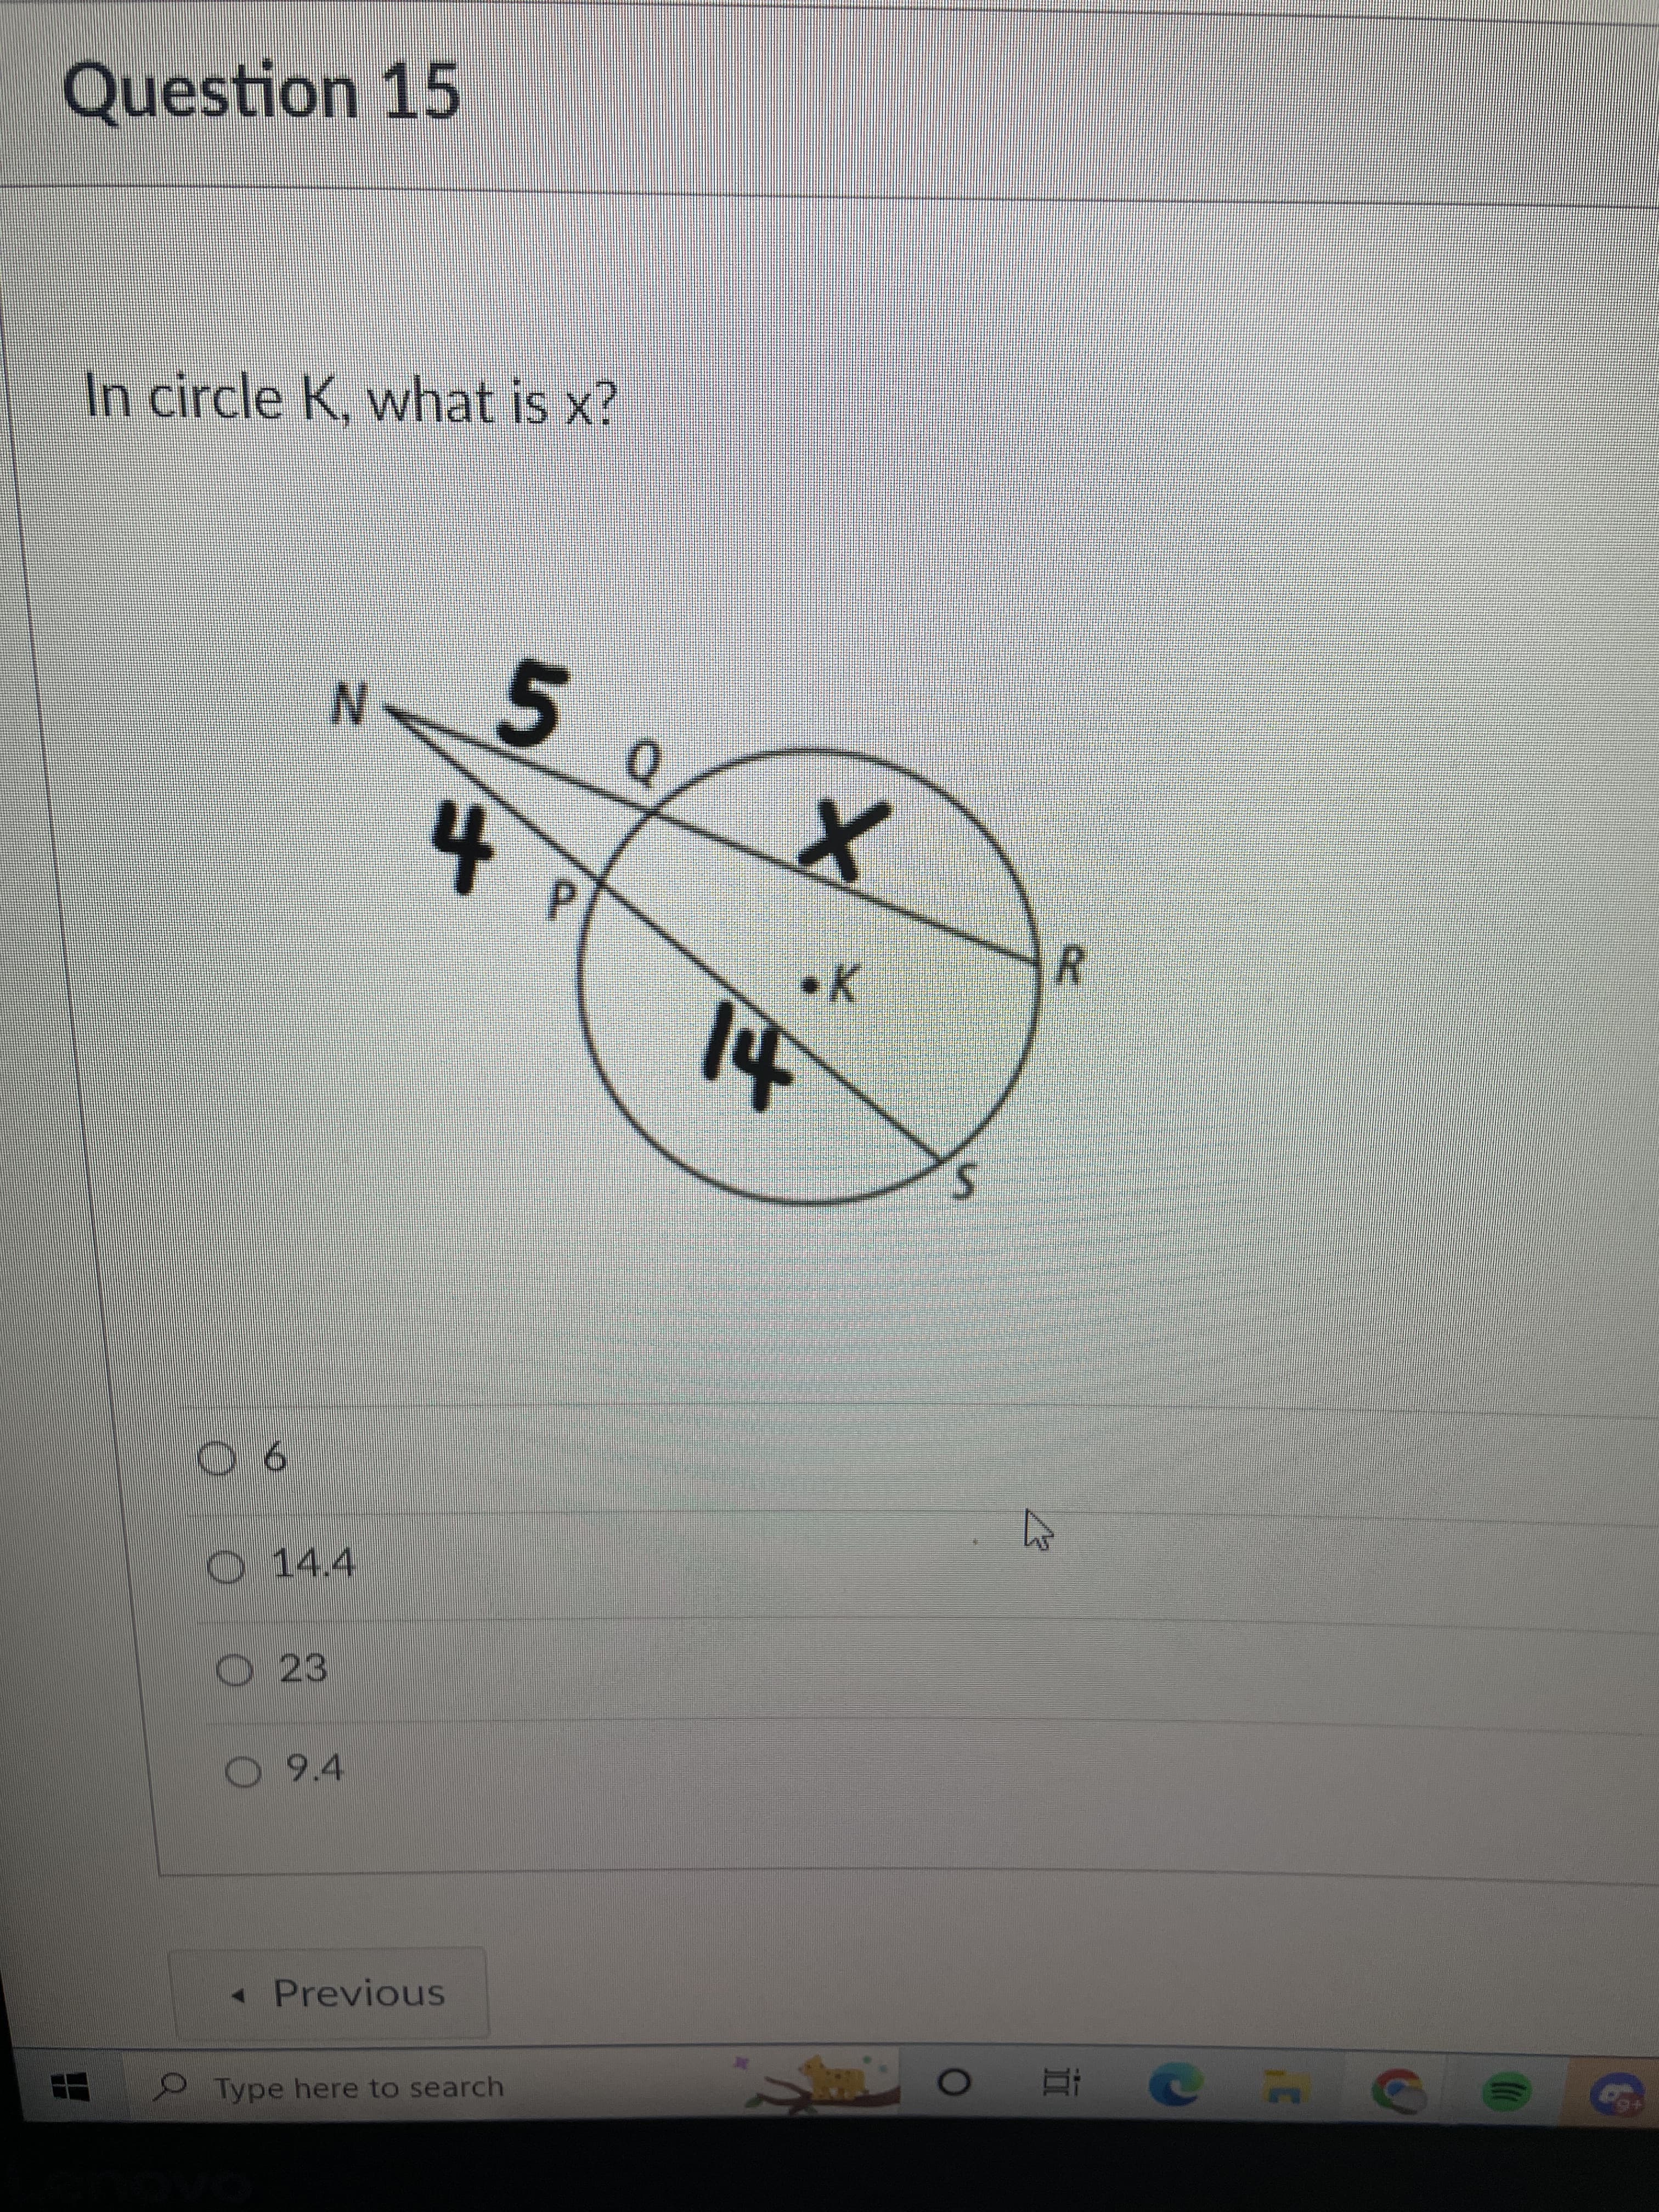 Question 15
In circle K, what is x?
N.
5.
P.
.K
9 0
14.4
O 23
O 94
« Previous
2 Type here to search
+6
